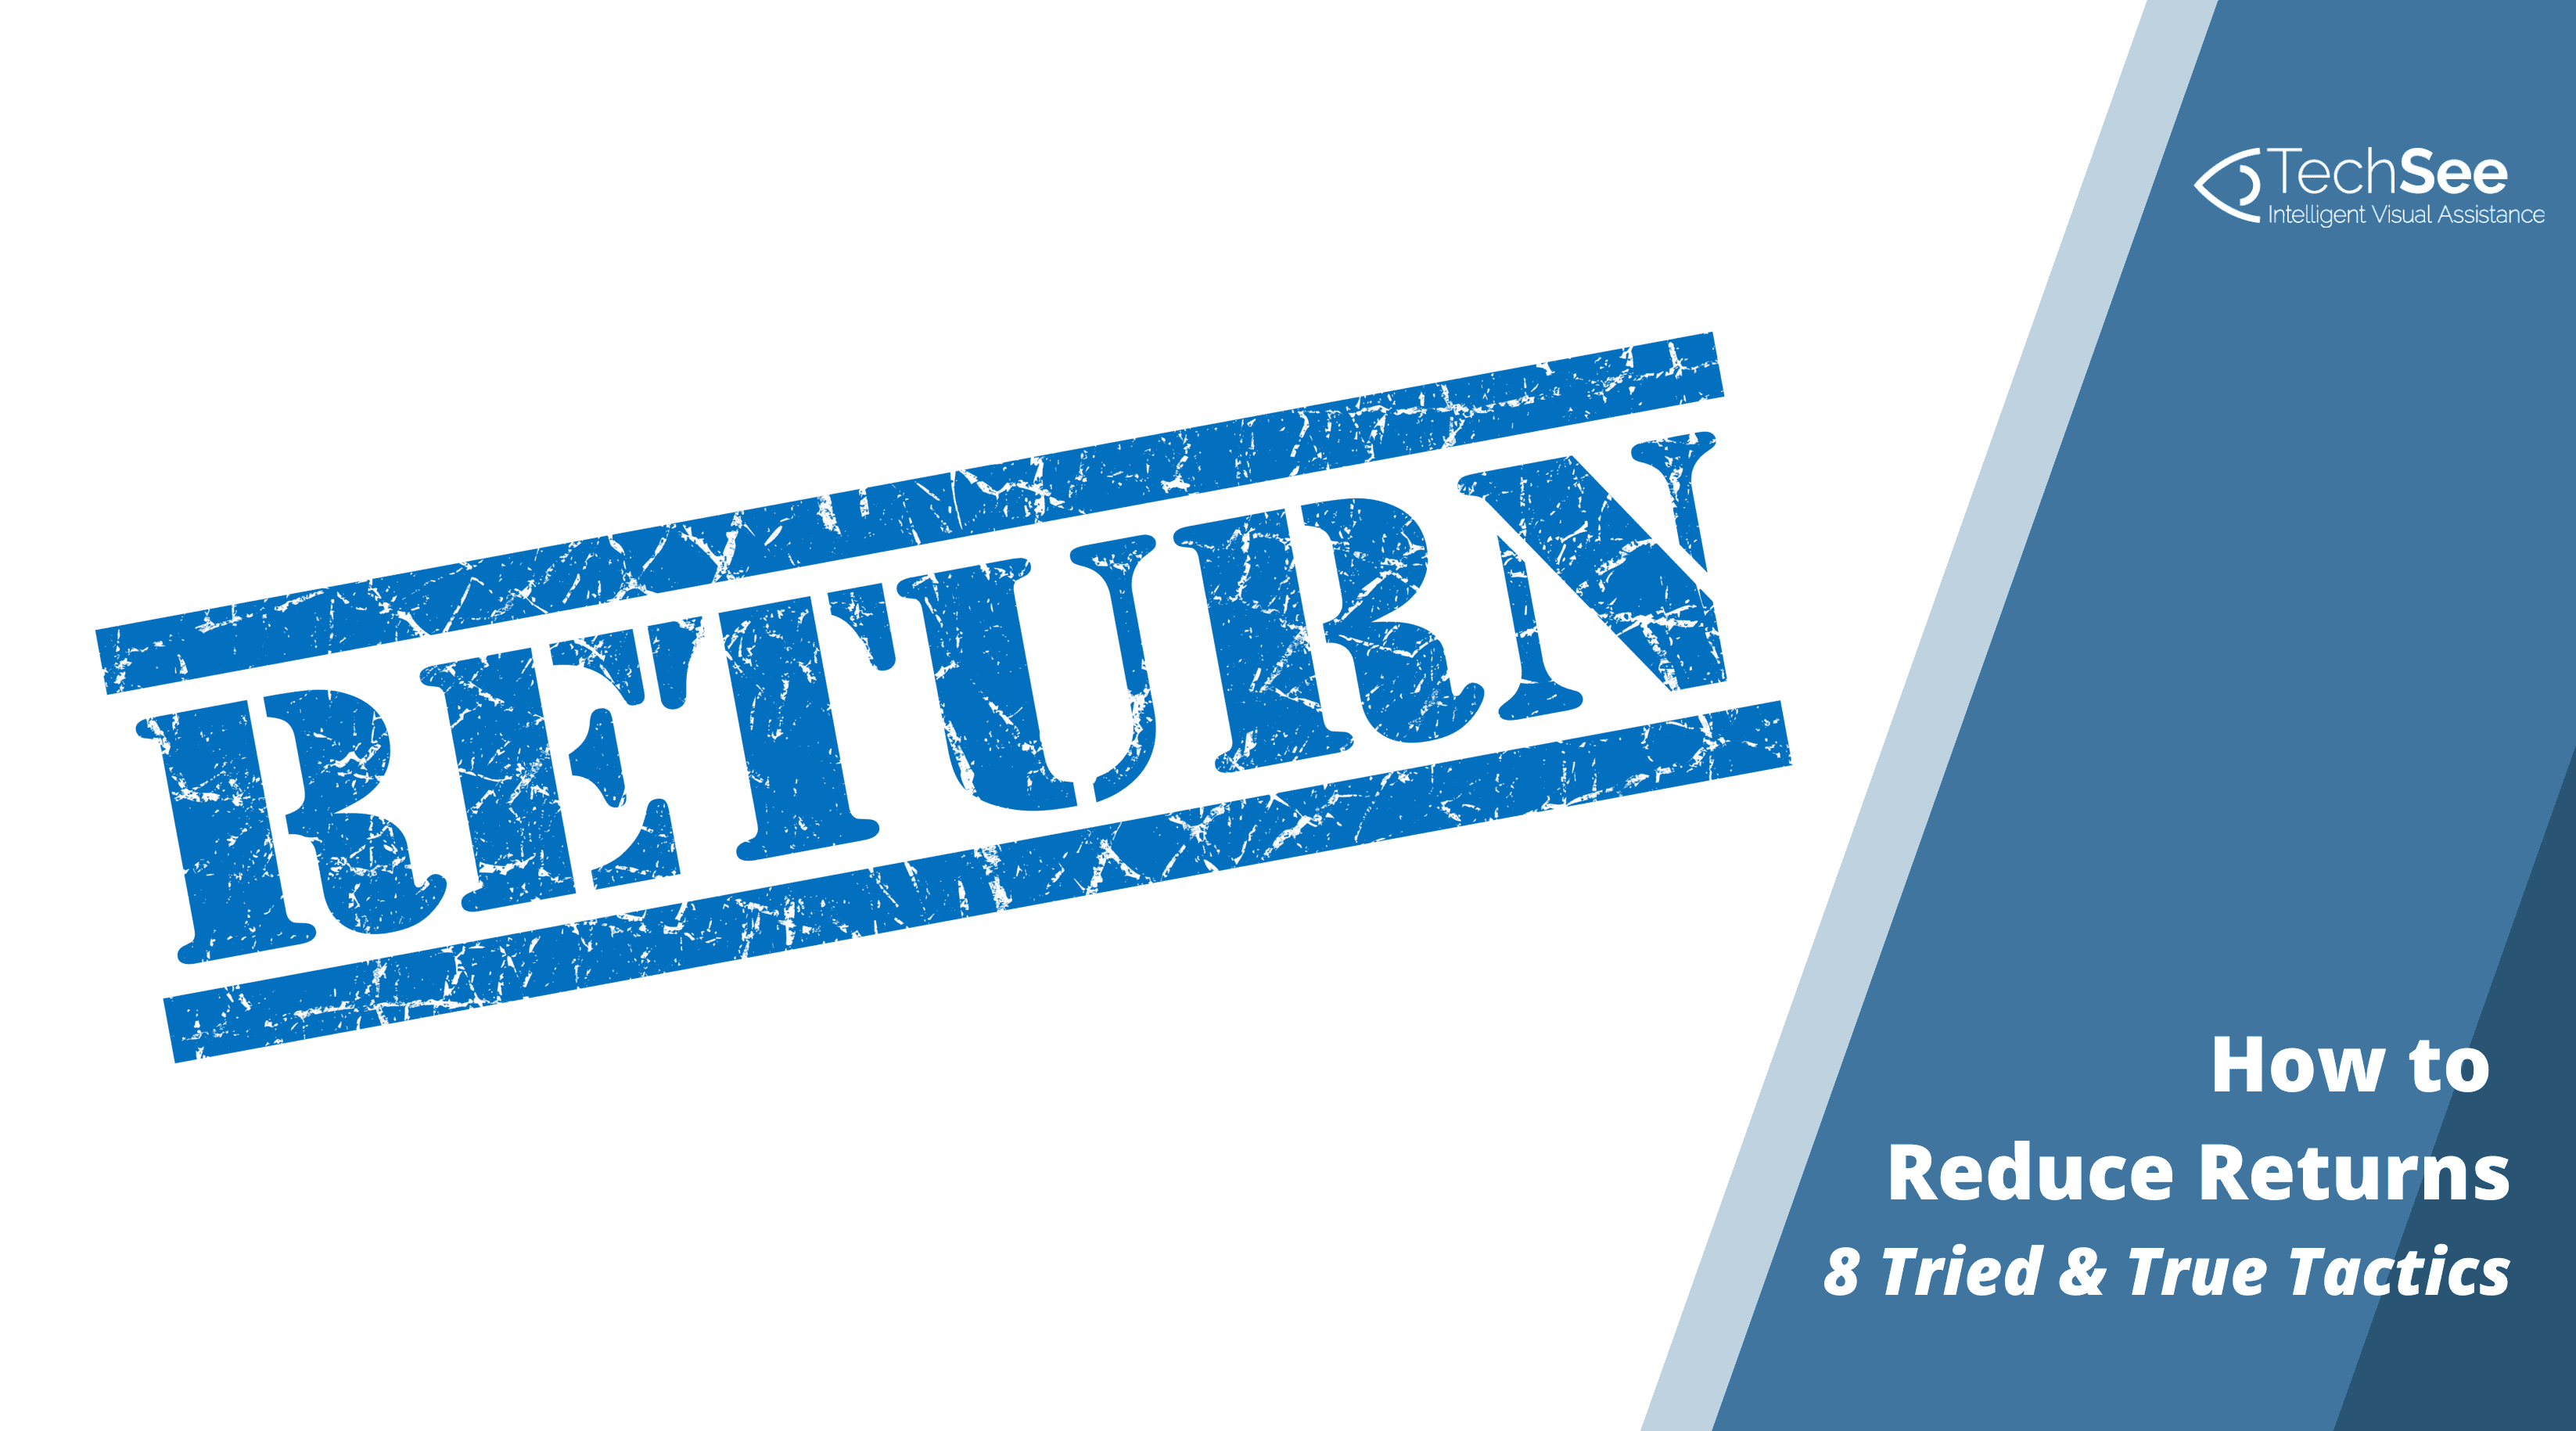 Explore 8 tried and true strategies of how to reduce returns.